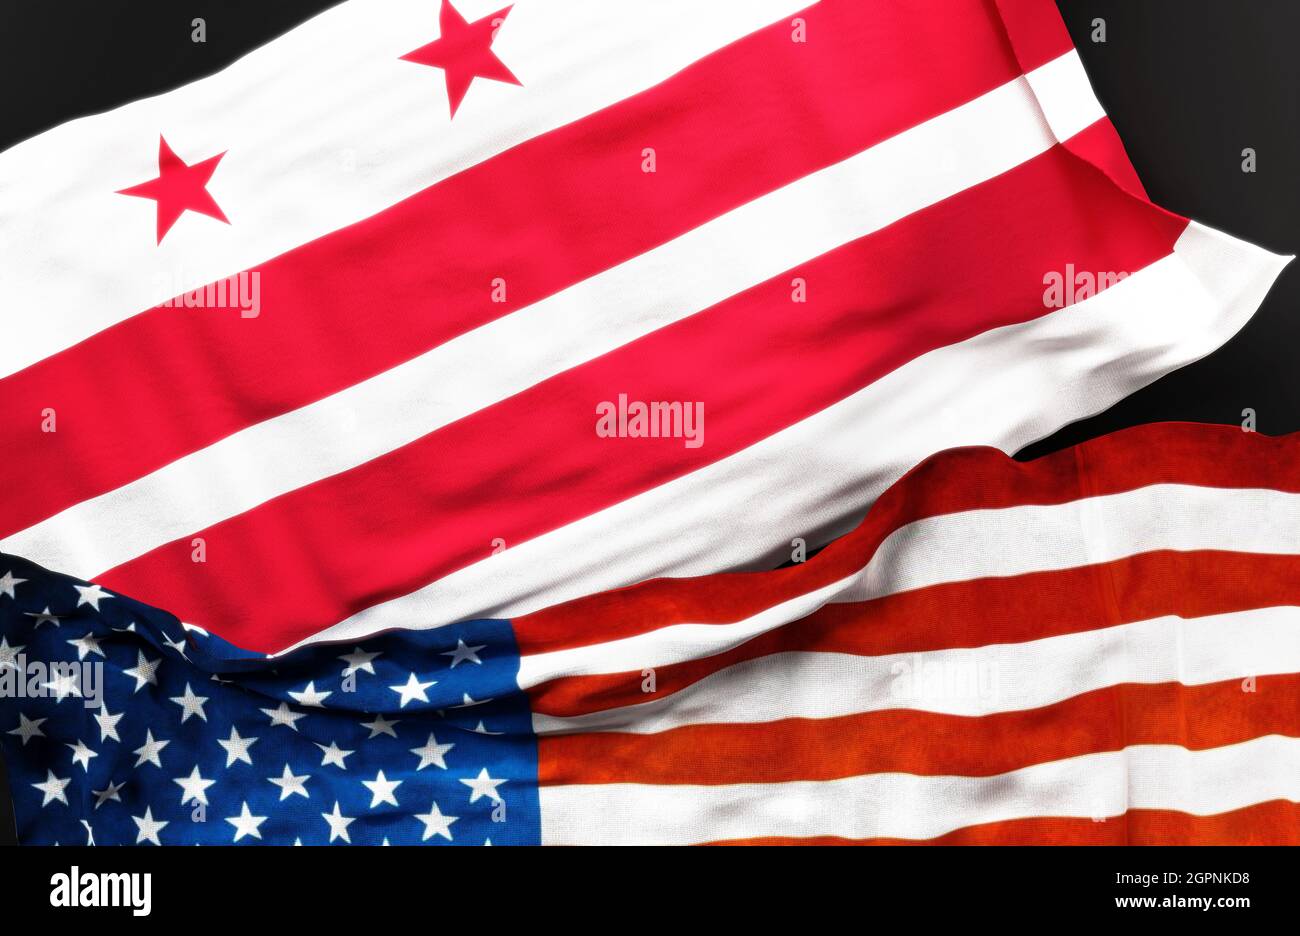 Flag of the District of Columbia along with a flag of the United States of America as a symbol of unity between them, 3d illustration Stock Photo